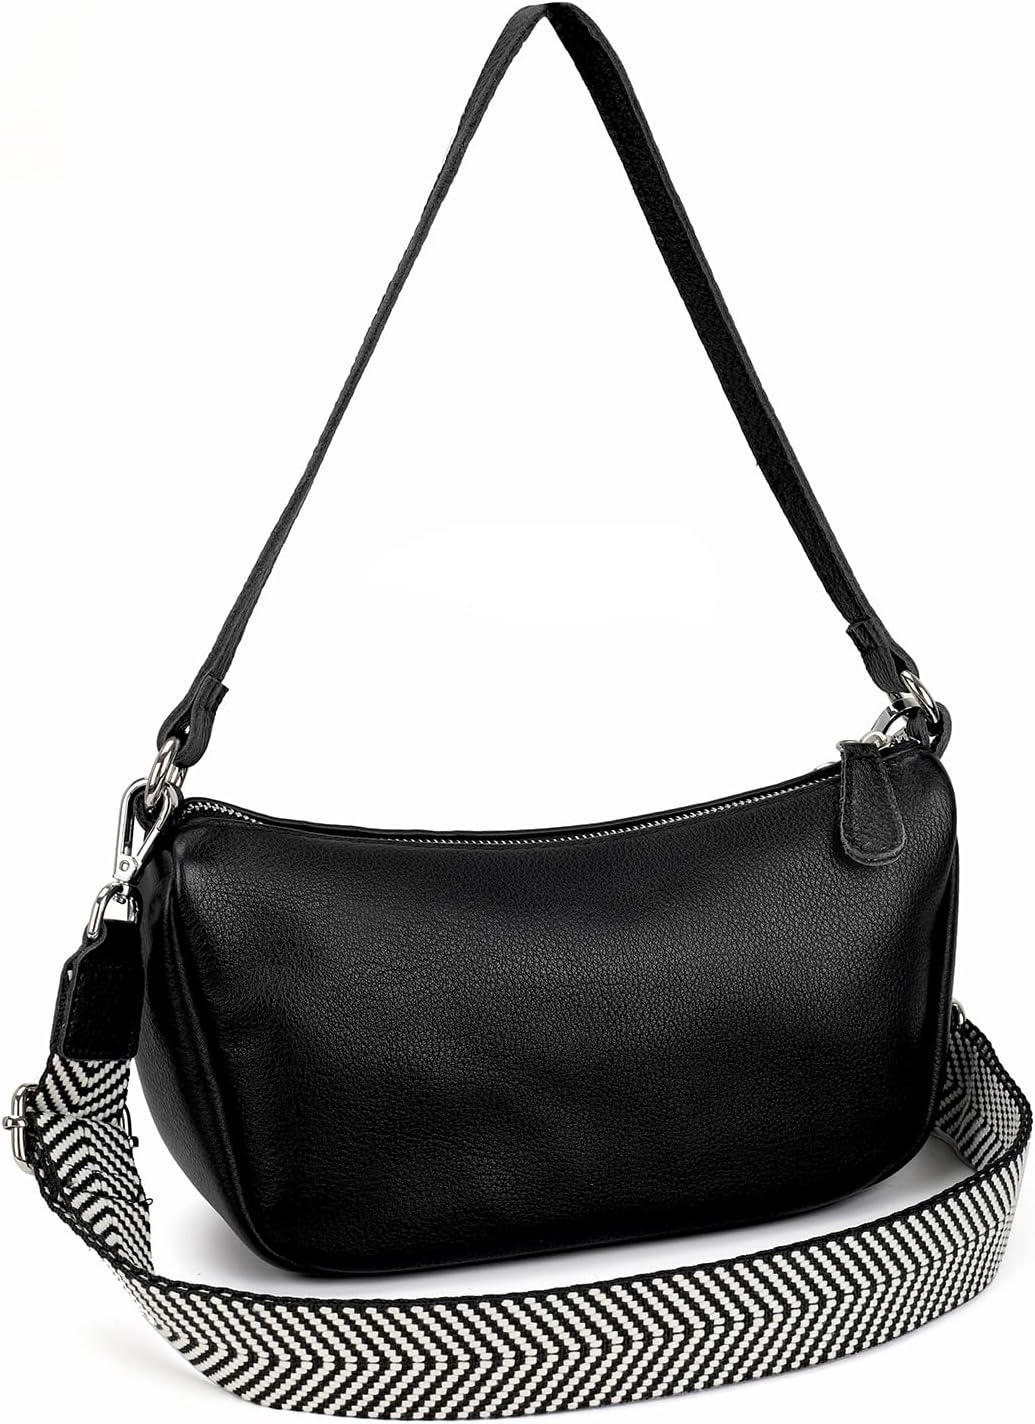 I LOVE this bag, my favorite feature is that even though it' a smaller bag, it has a wider base so you can fit so much into it and not have it all collapse in so you can't find your items. I LOVE that, but also the soft, buttery, pebbled leather is really lovely! So many times a crossbody bag is so narrow you have to take everything out to find the 1 thing in the bottom you want, well this beauty solves that issue that always annoyed me. The crossbody long strap is really comfortable on the bod